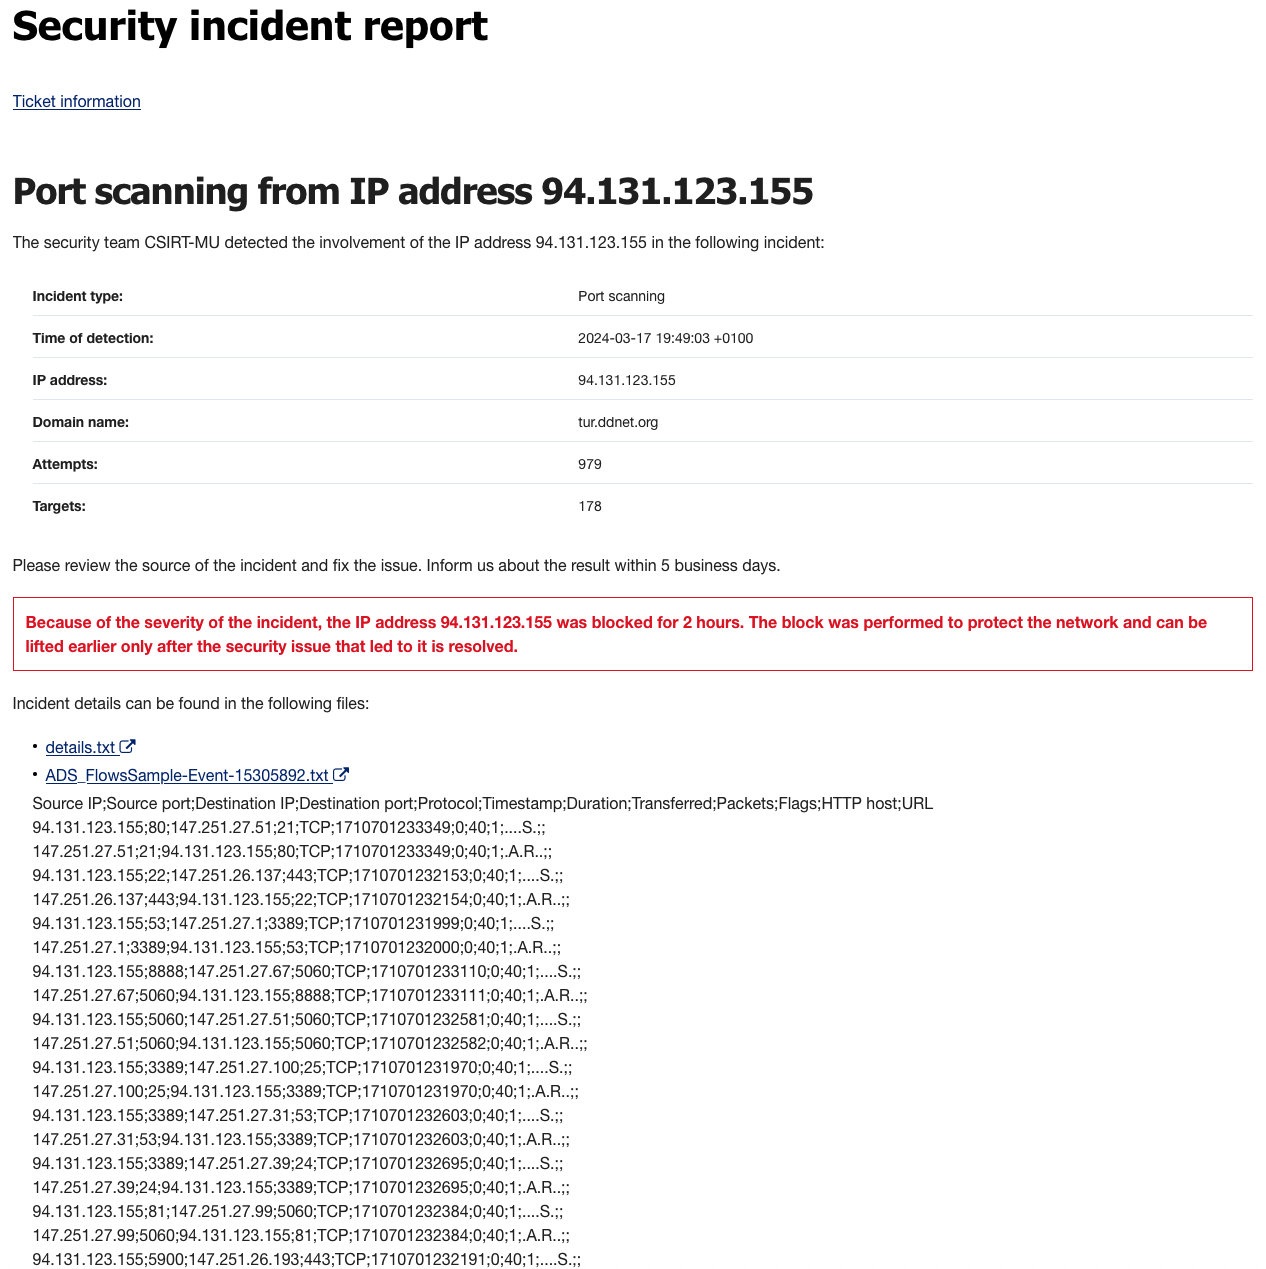 Security incident report